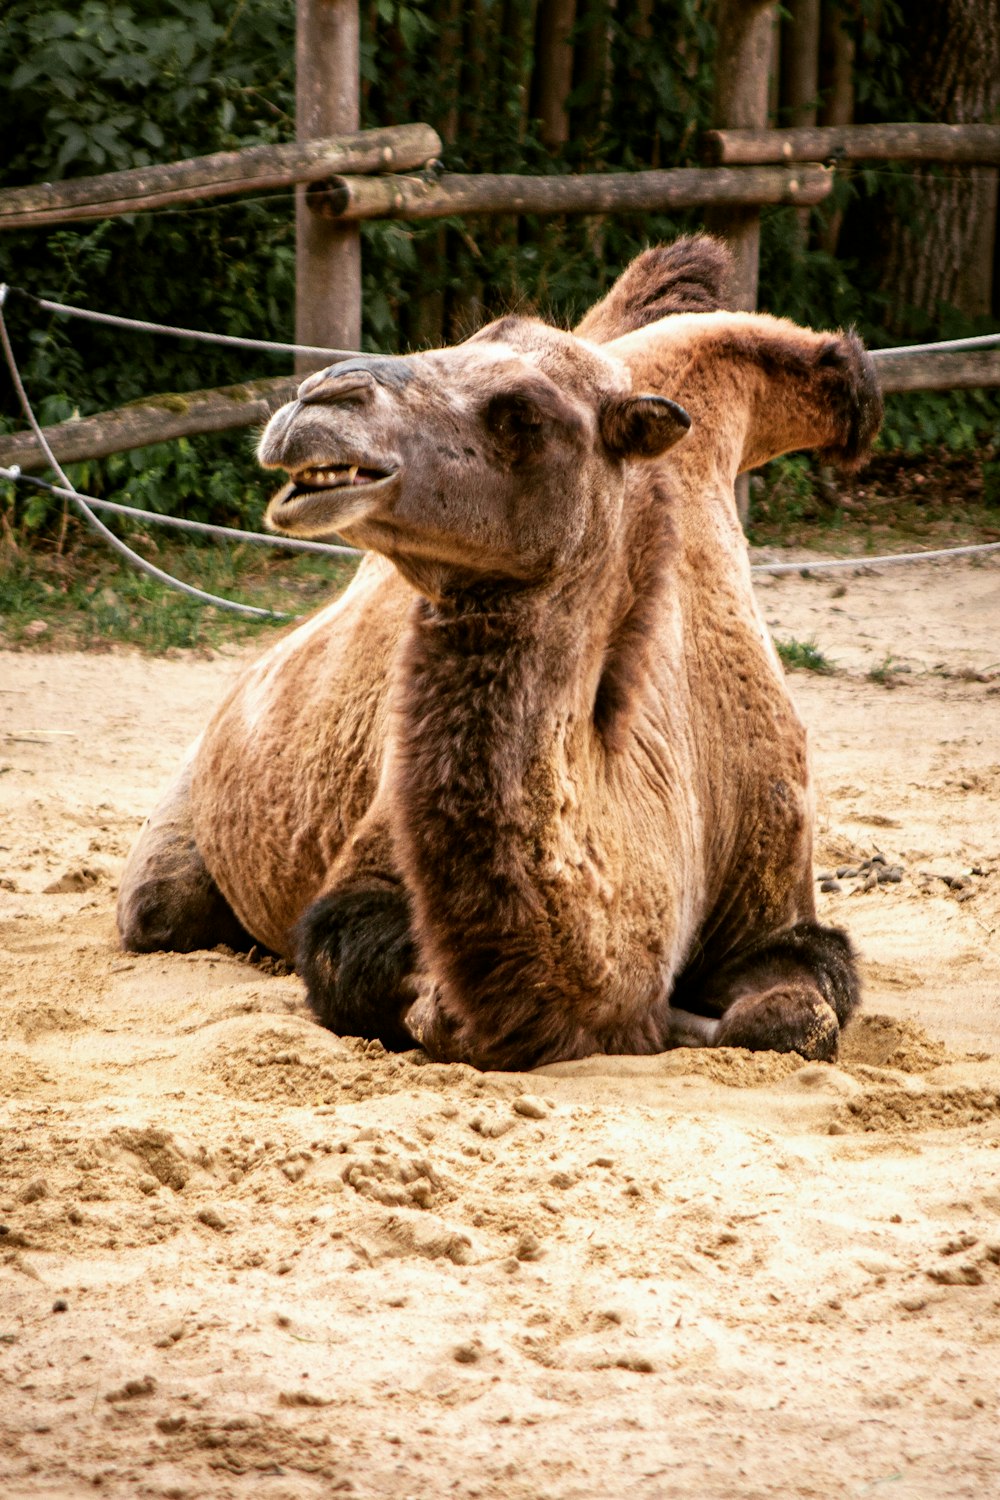 brown camel lying on brown sand during daytime